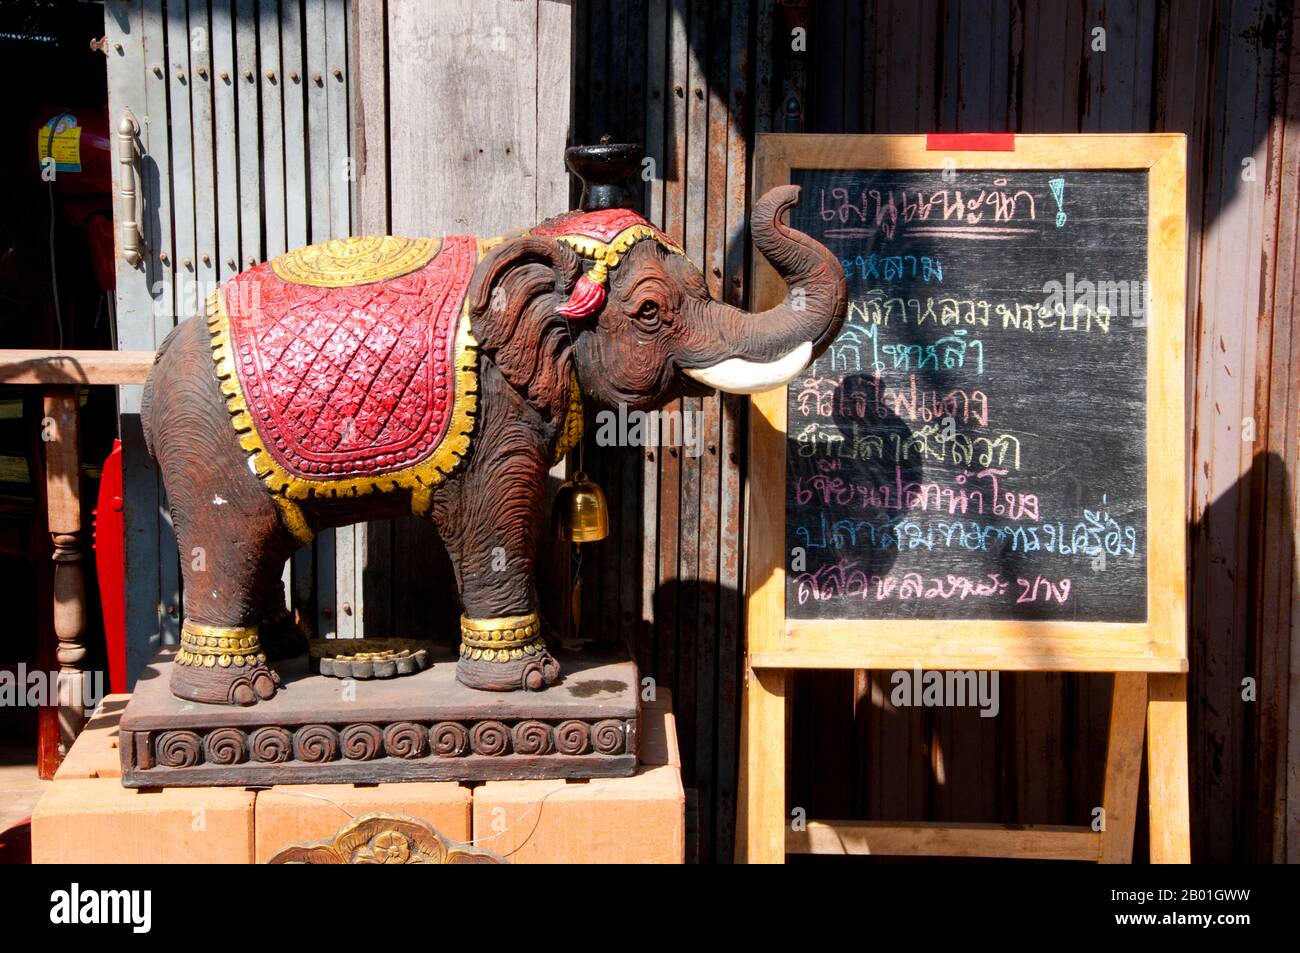 Thailand: Wooden elephant and menu outside a restaurant on Chai Kong Road, Chiang Khan, Loei Province.  Loei (Thai: เลย) Province is located in Thailand's upper North-East. Neighboring provinces are (from east clockwise) Nong Khai, Udon Thani, Nongbua Lamphu, Khon Kaen, Phetchabun, Phitsanulok. In the north it borders Xaignabouli and Vientiane Provinces of Laos.  The province is covered with low mountains, while the capital Loei is located in a fertile basin. The Loei River, which flows through the province, is a tributary of the Mekong. Stock Photo